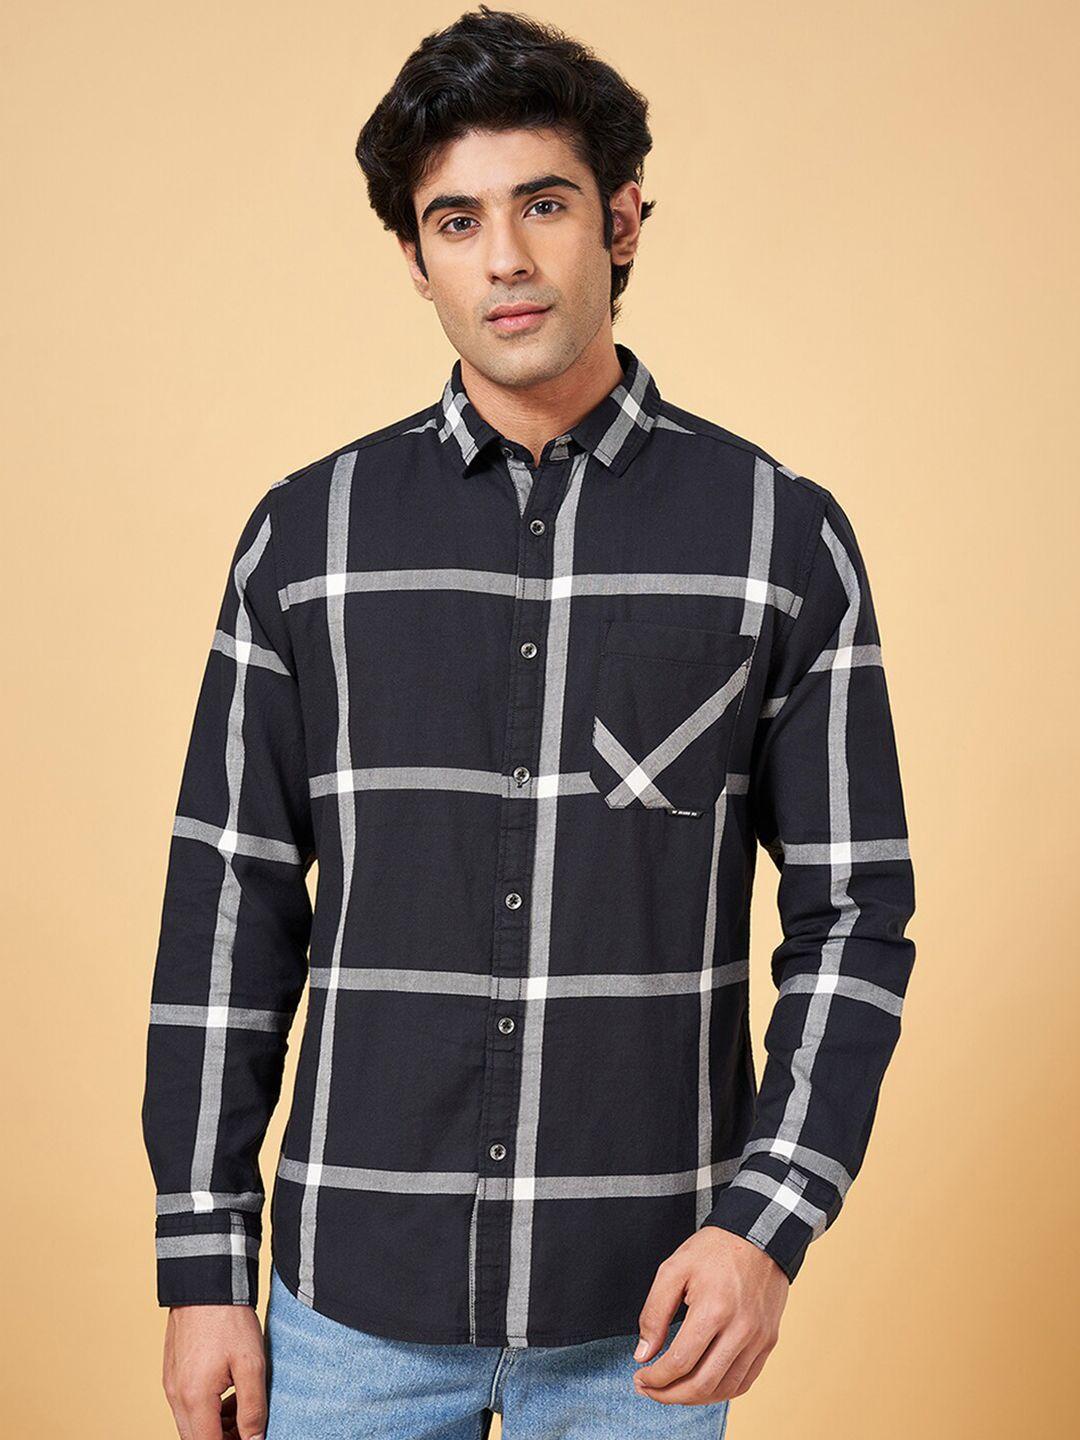 sf jeans by pantaloons windowpane checked cotton slim fit casual shirt